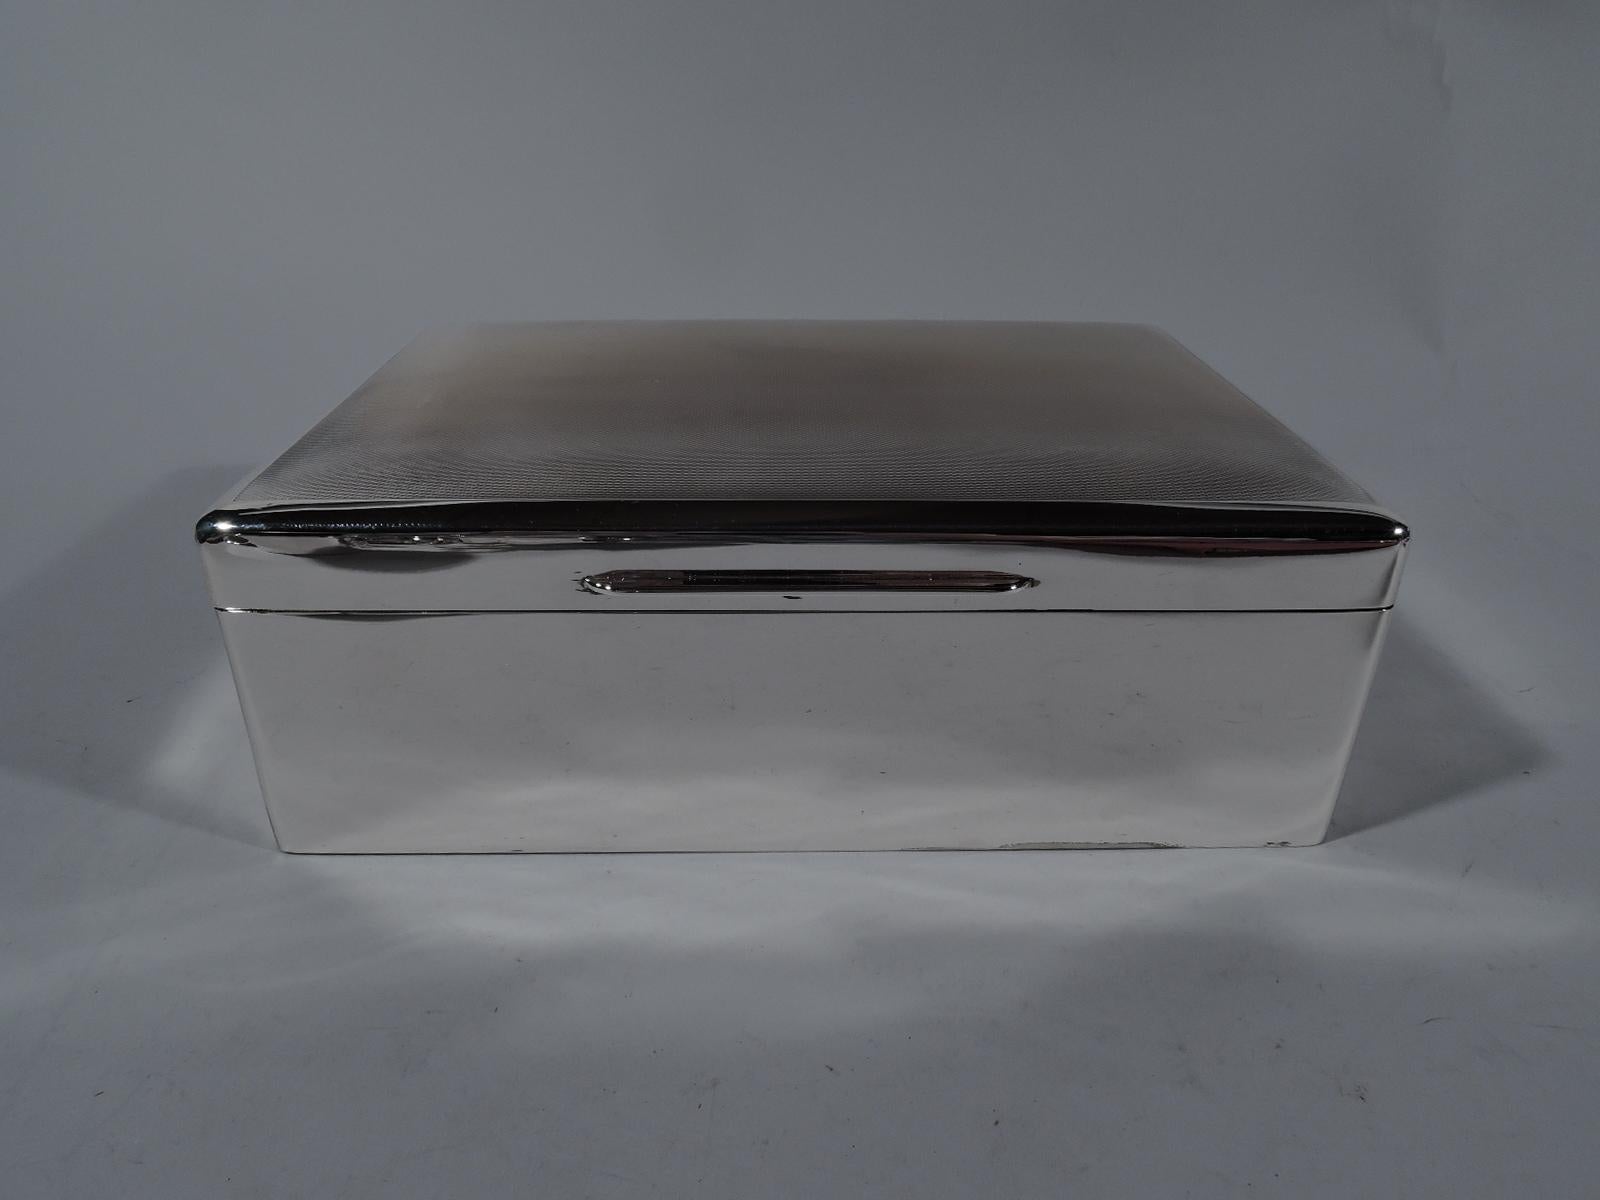 Large English modern sterling silver box, 1945. Rectangular with straight sides and curved corners. Cover hinged with gently curved and engine-turned top, and chamfered tab. Box and cover interior cedar-lined and partitioned. Box underside leather